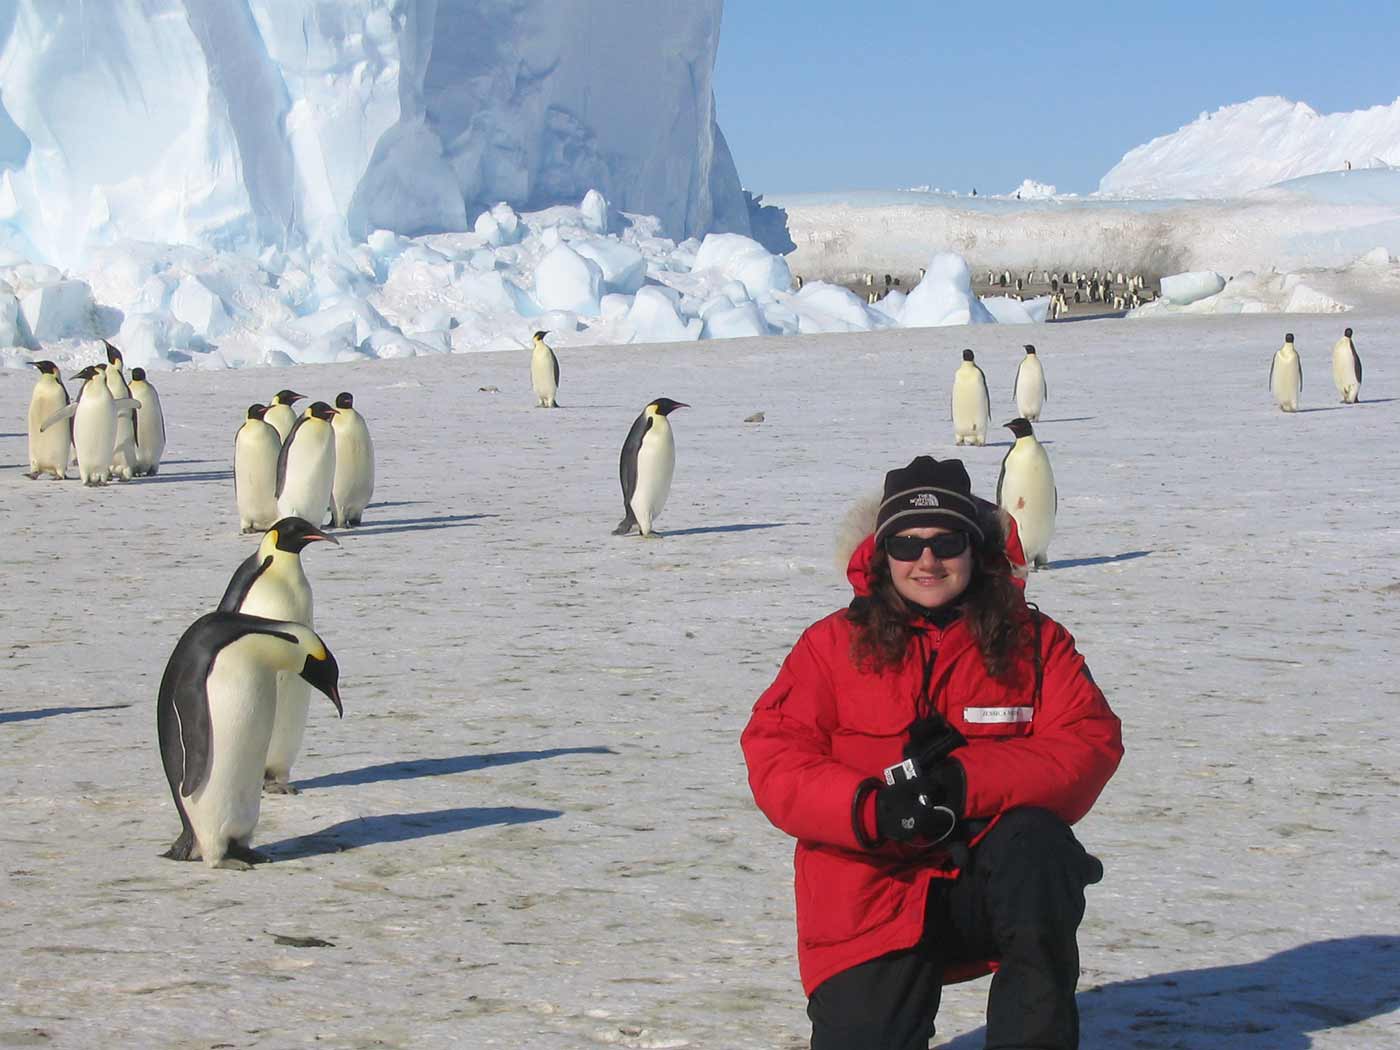 Jessica Meir in Antartica with penguins